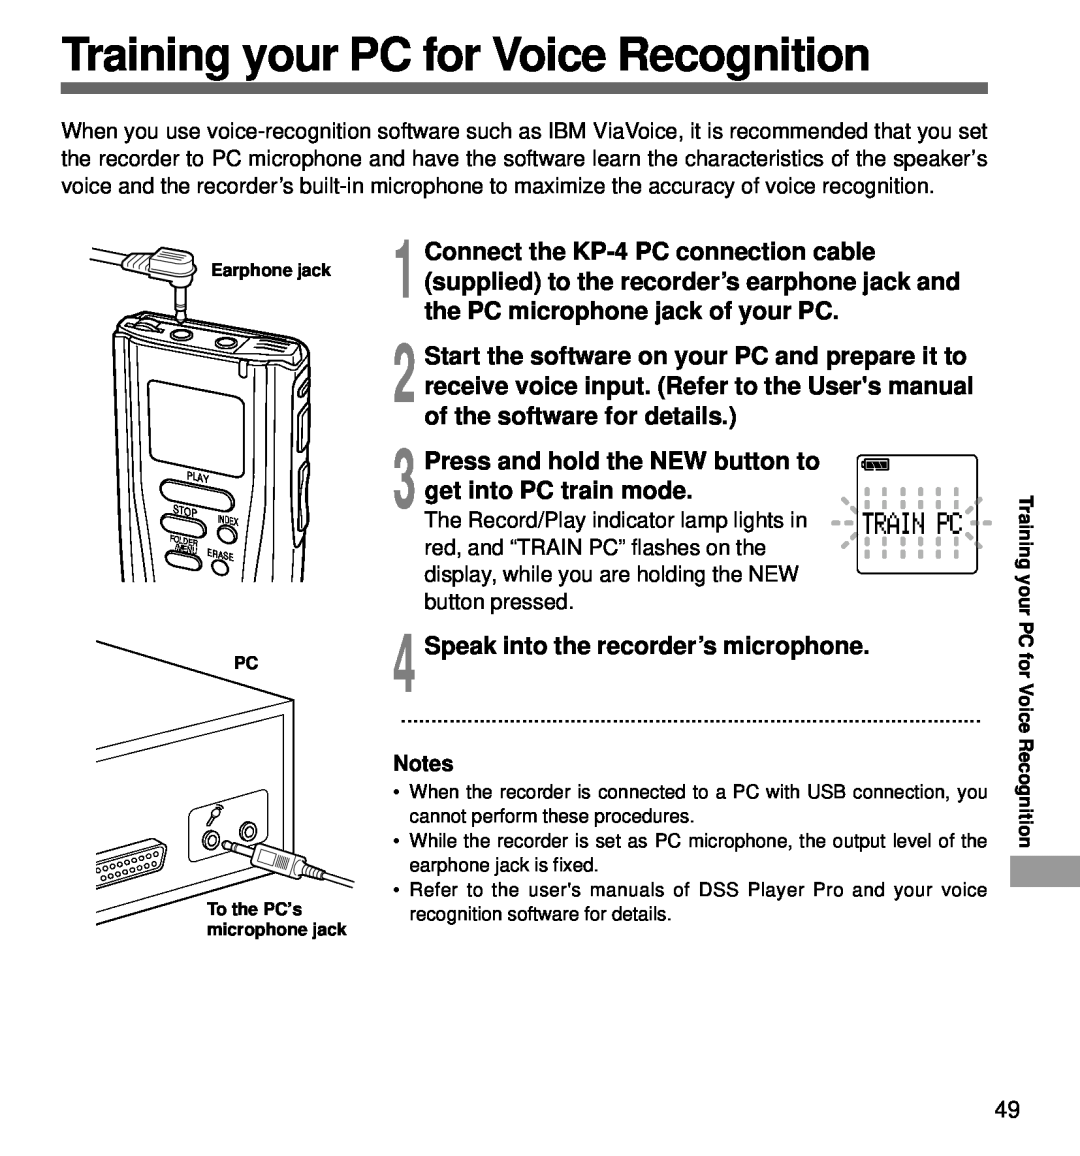 Olympus DS-3000 manual Training your PC for Voice Recognition, Press and hold the NEW button to get into PC train mode 